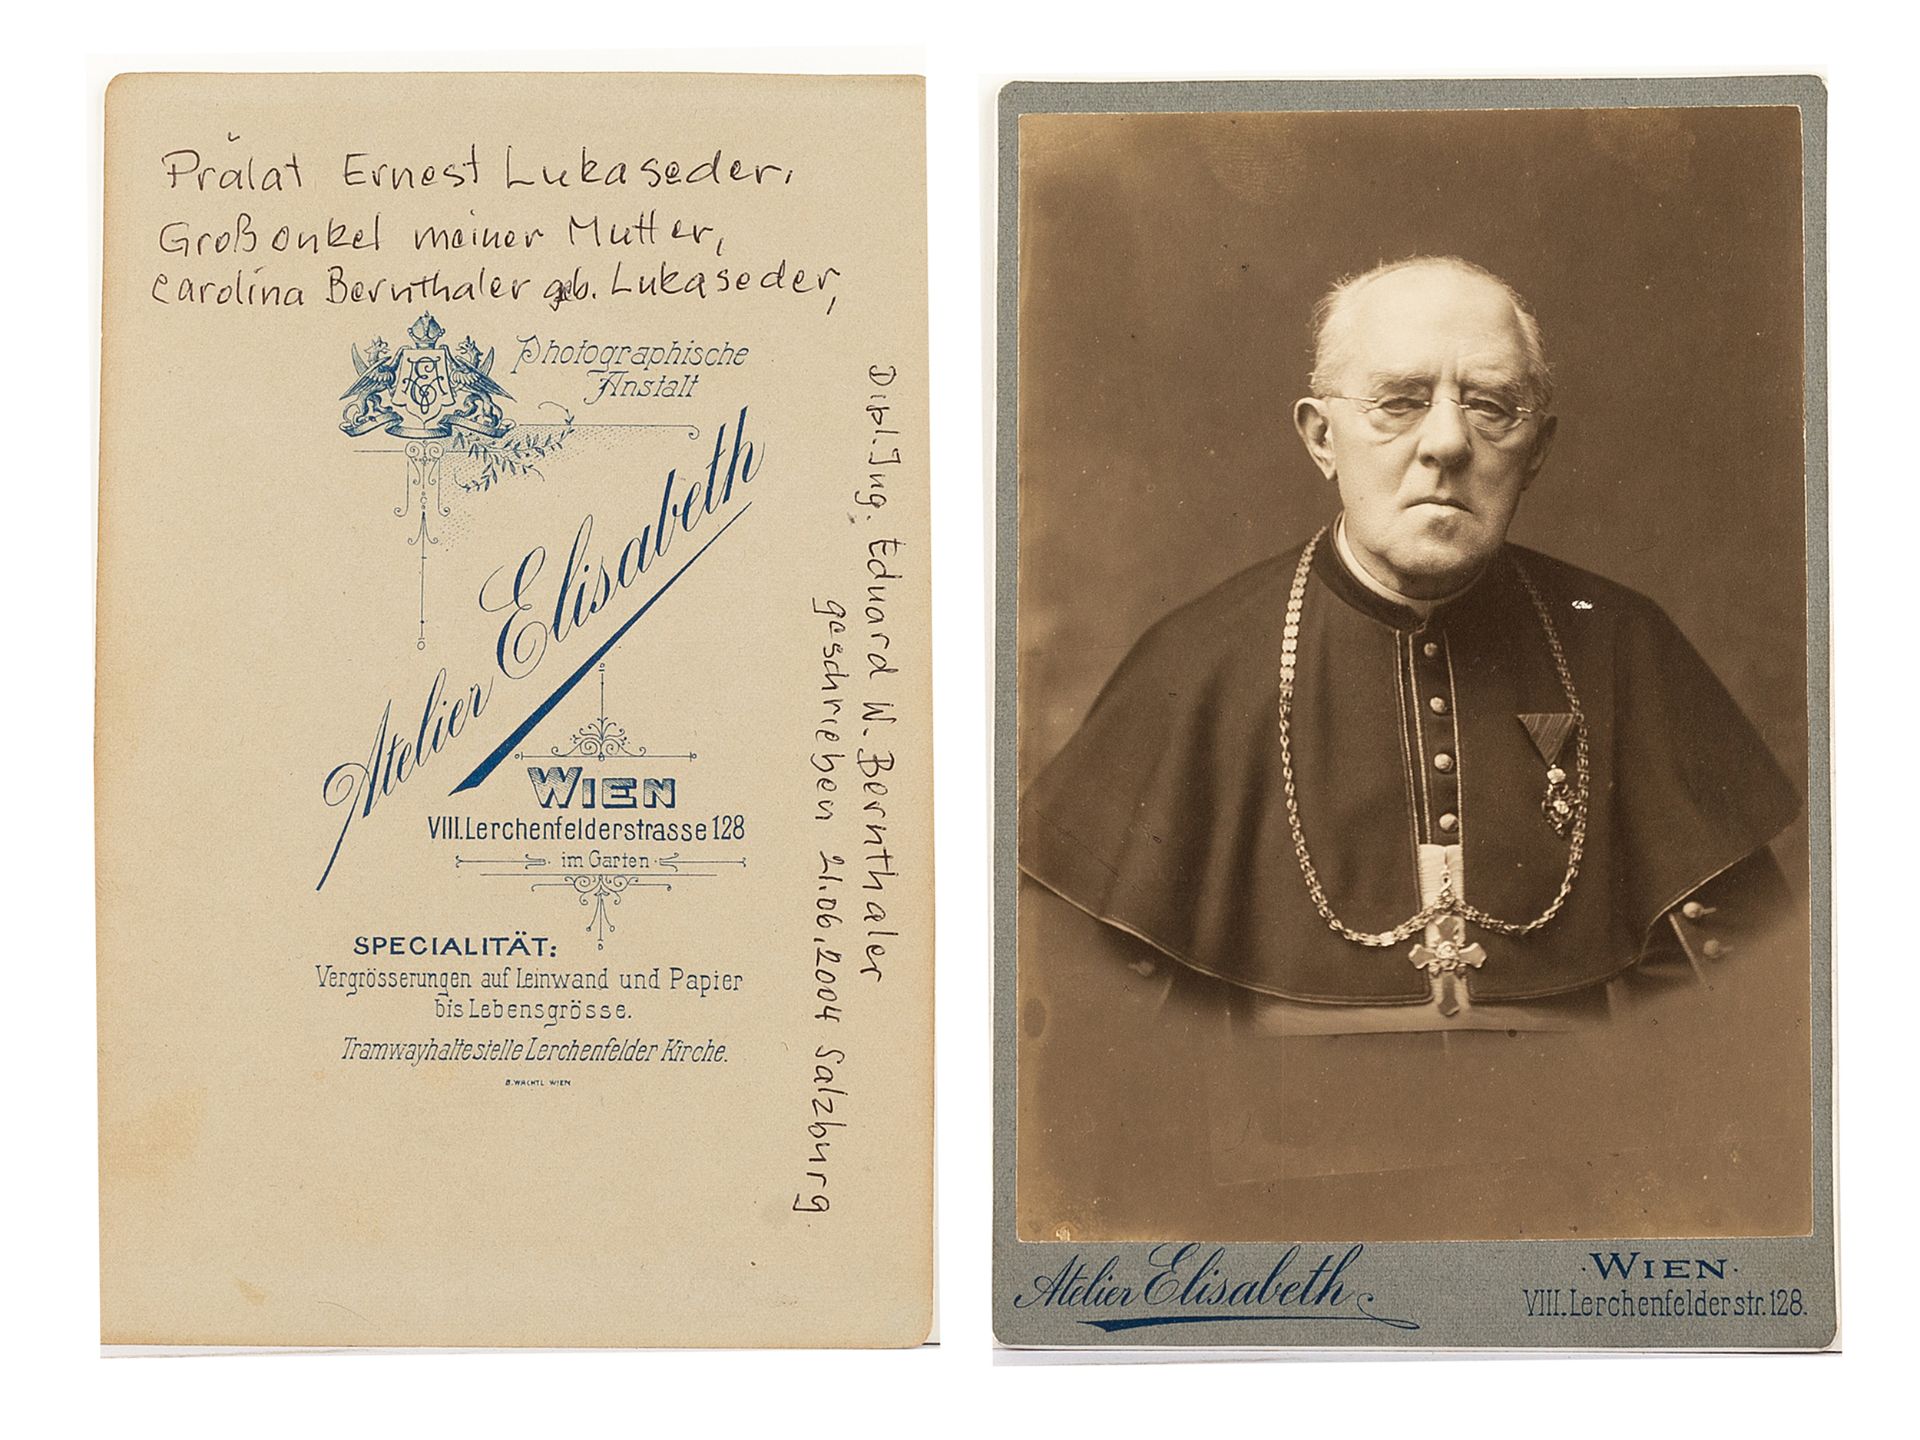 Certificate for the 50th birthday of Ernest Lukaseder, February 1911 - Image 6 of 6